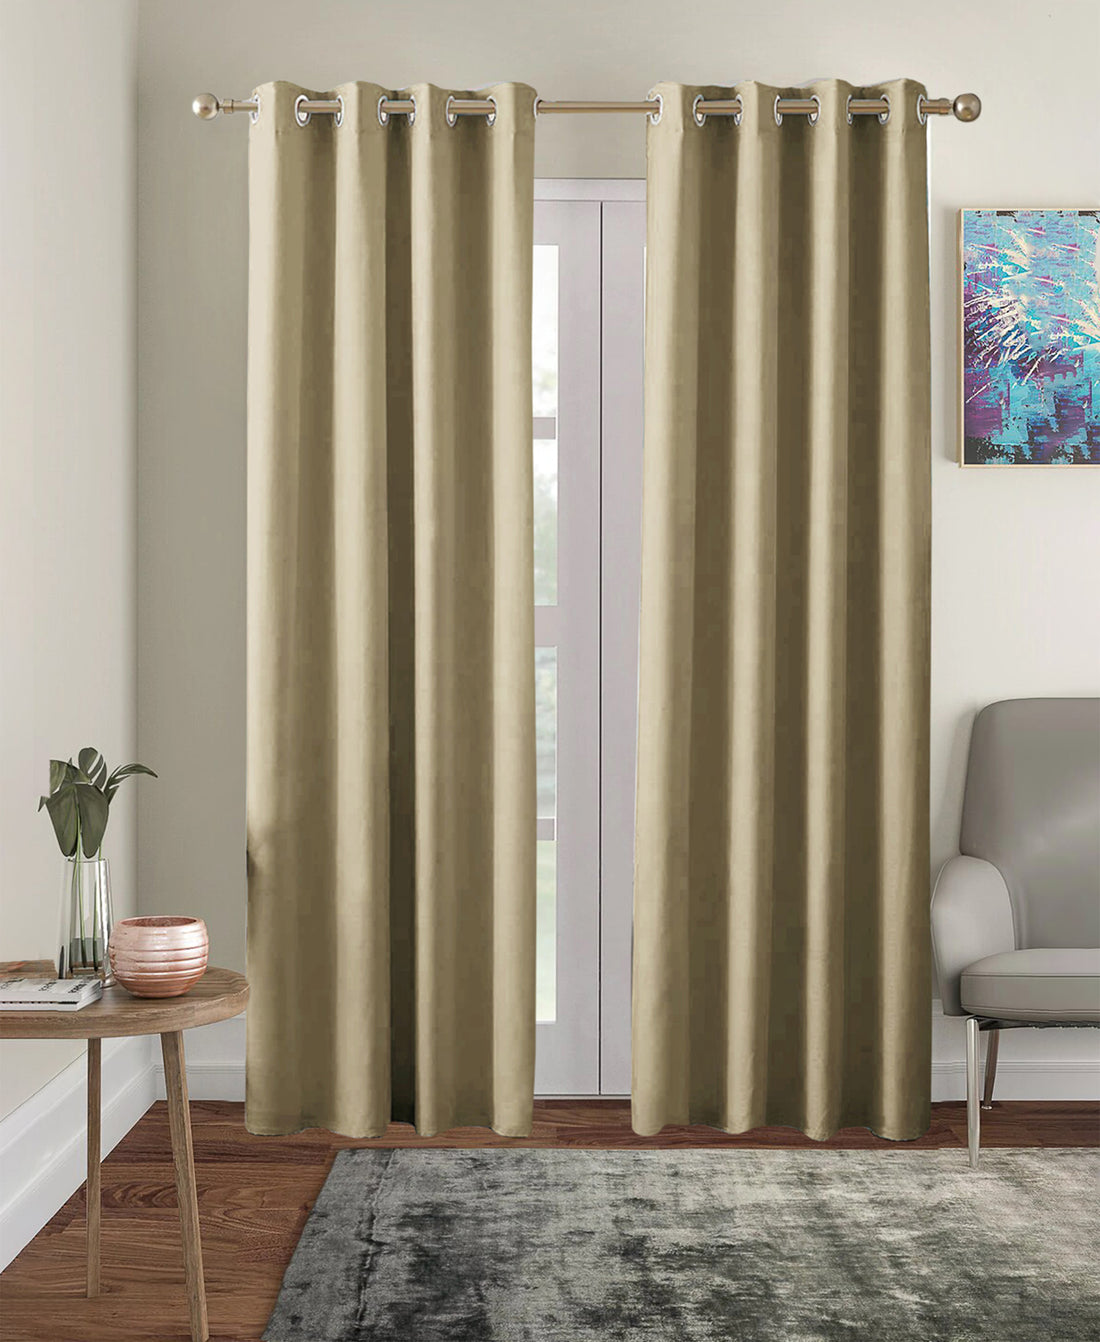 Set of 2 Blackout Solid Polyester Grommet Curtains